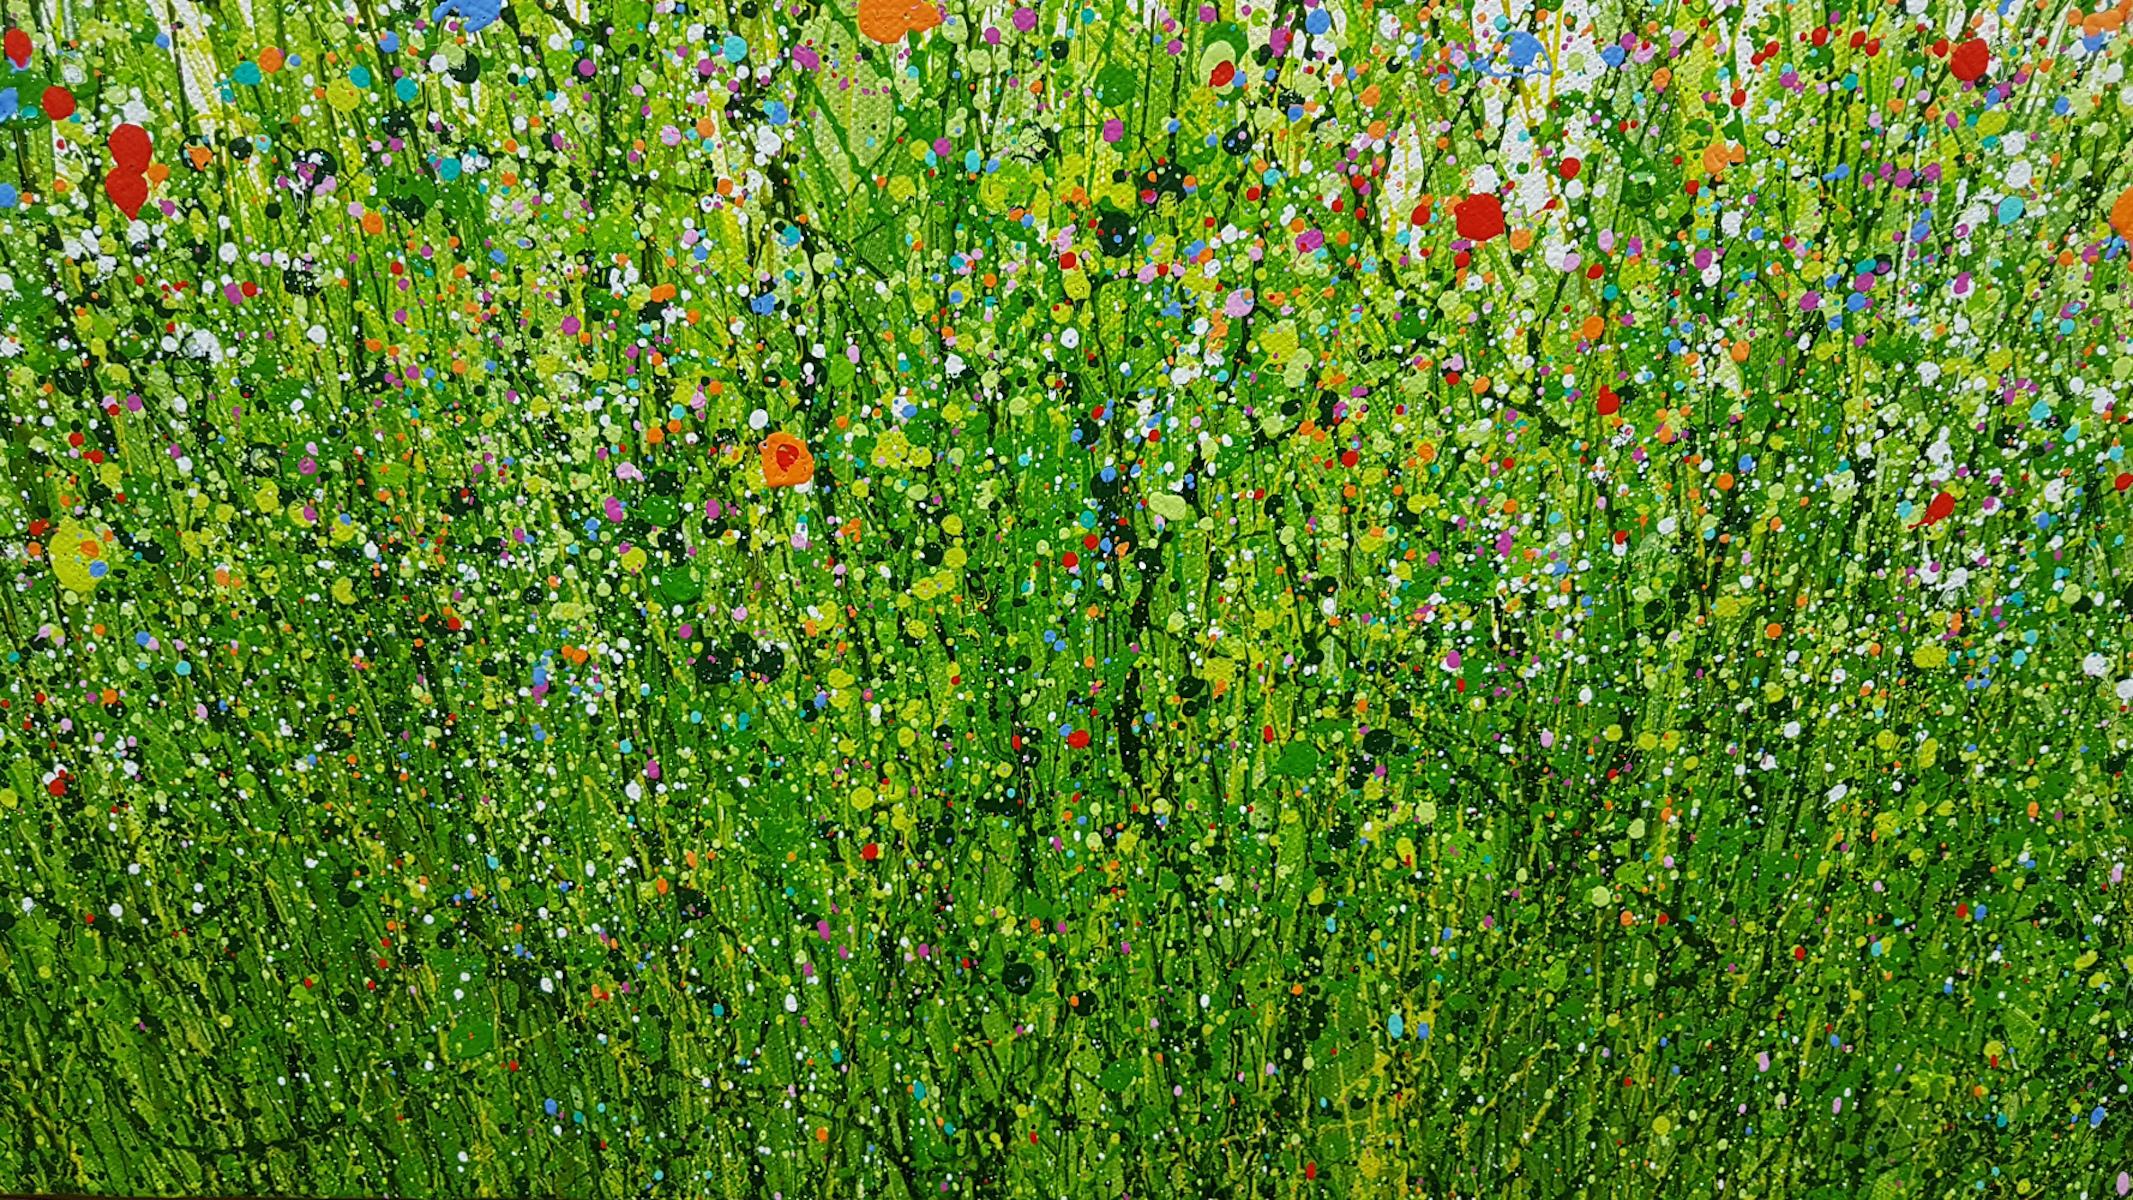 Painted Meadows #13 – By Lucy Moore [2022]
original and hand signed by the artist
Acrylic on canvas
Image size: H:60 cm x W:60 cm
Complete Size of Unframed Work: H:60 cm x W:60 cm x D:1.5cm
Sold Unframed
Please note that insitu images are purely an